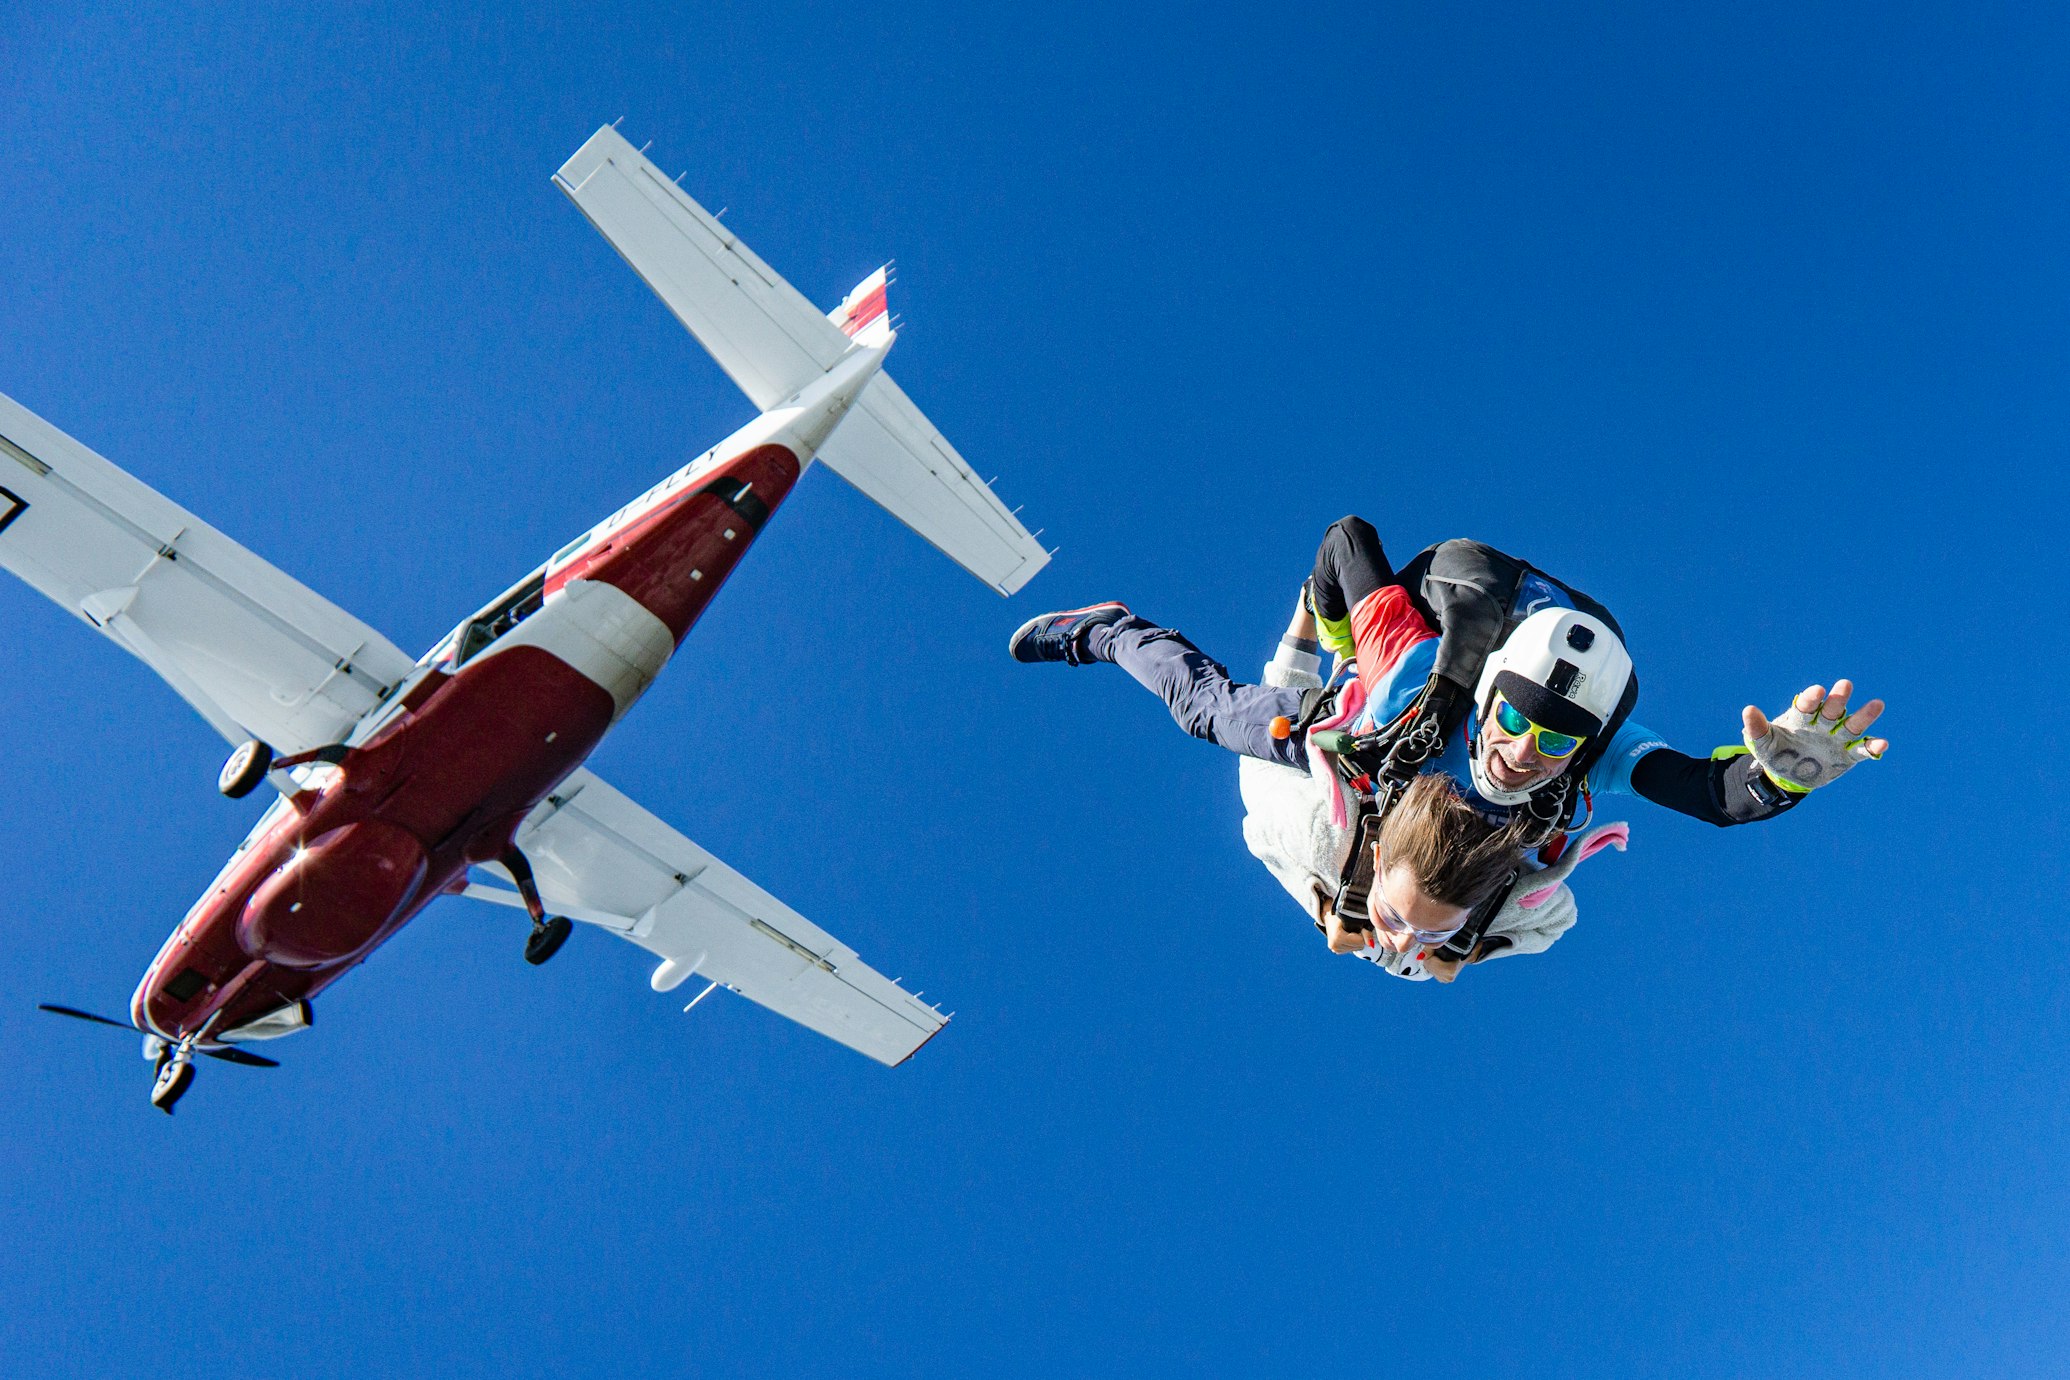 2 people skydiving off of a red airplane